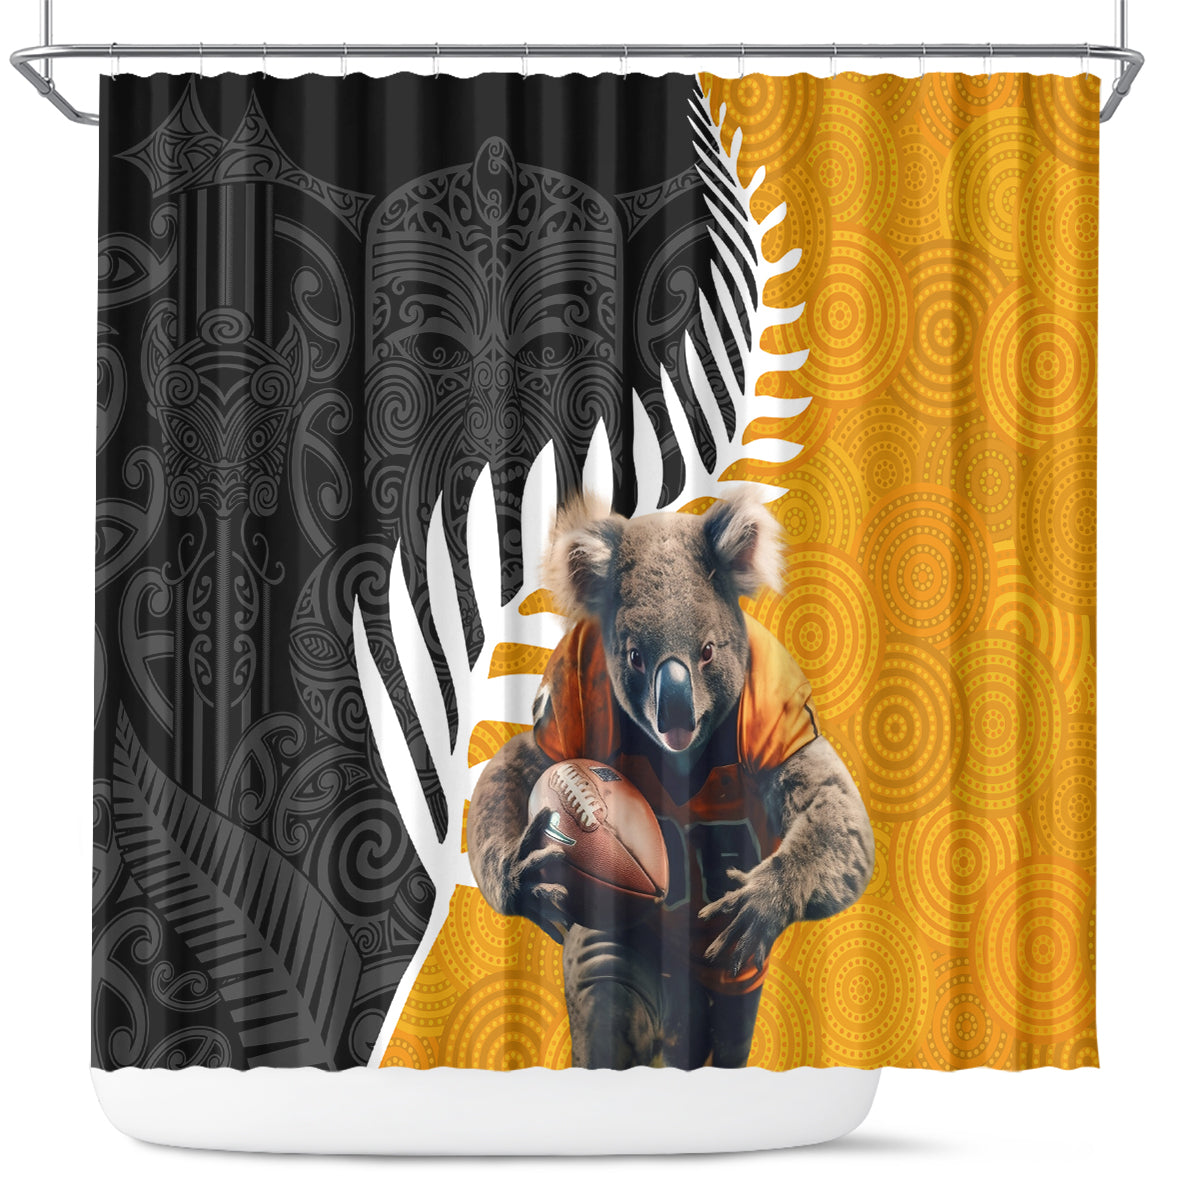 New Zealand and Australia Rugby Shower Curtain Koala and Maori Warrior Together